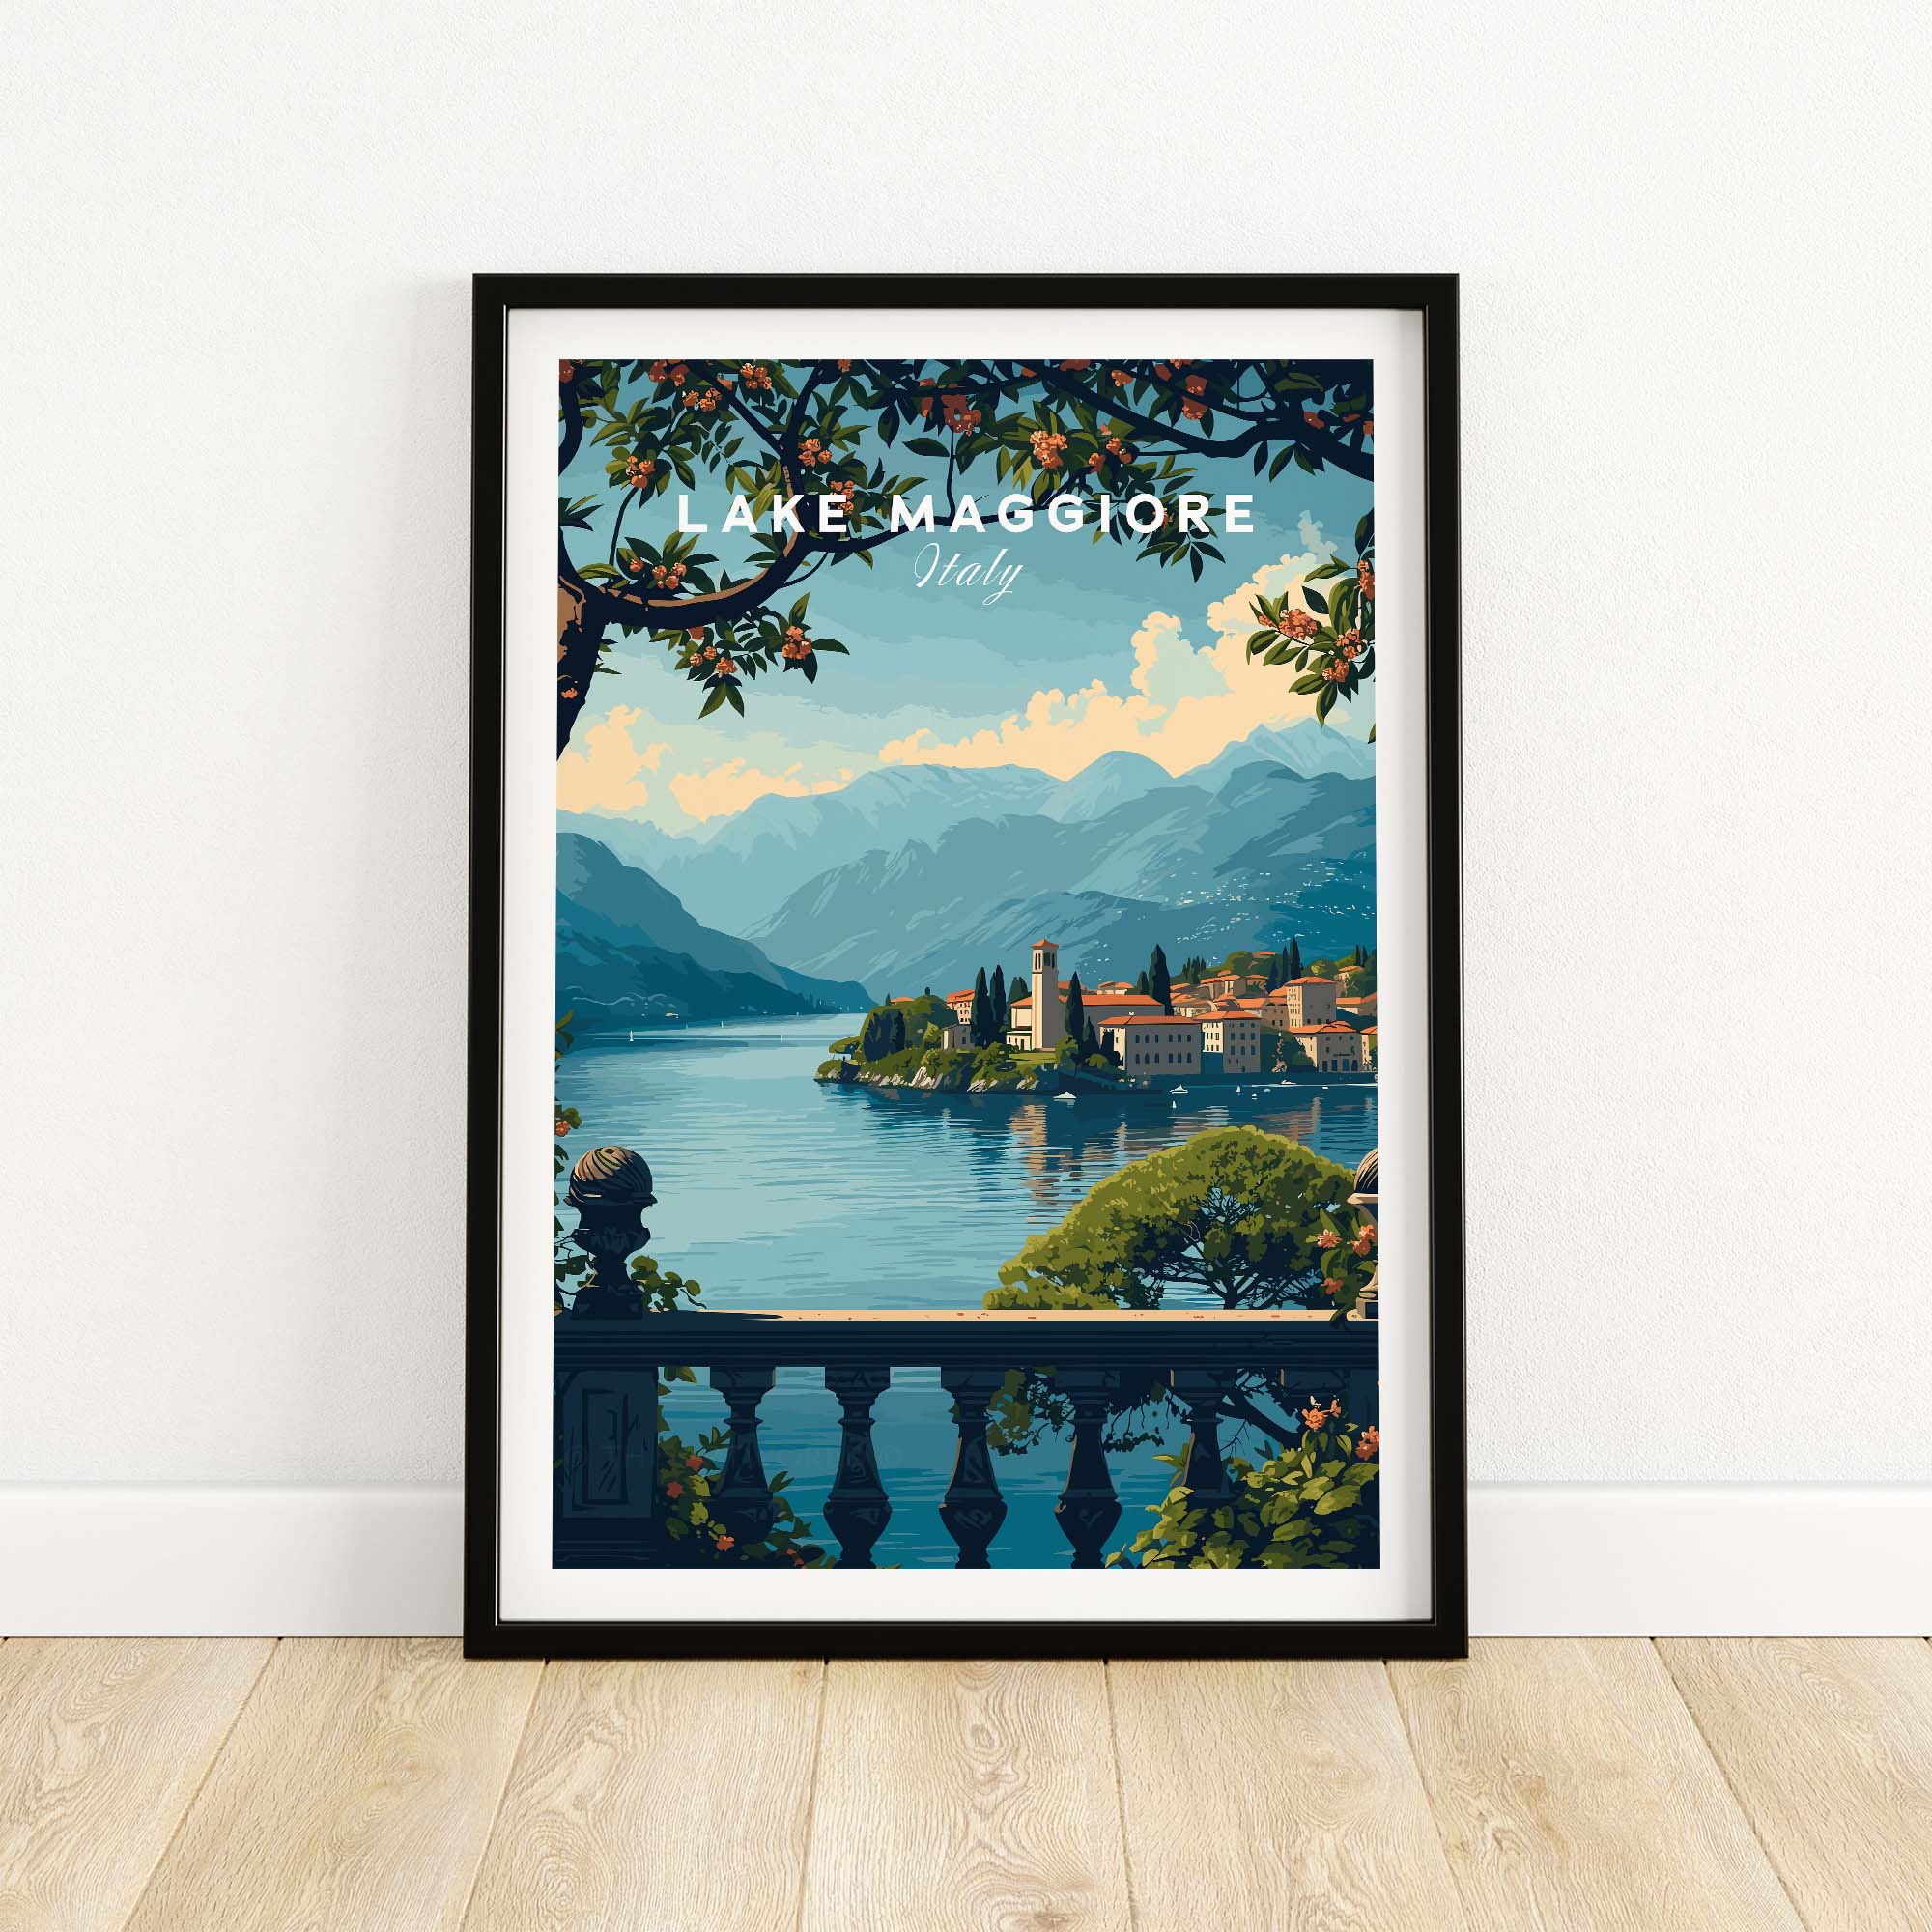 Lake Maggiore Travel Poster part of our best collection or travel posters and prints - ThisArtWorld